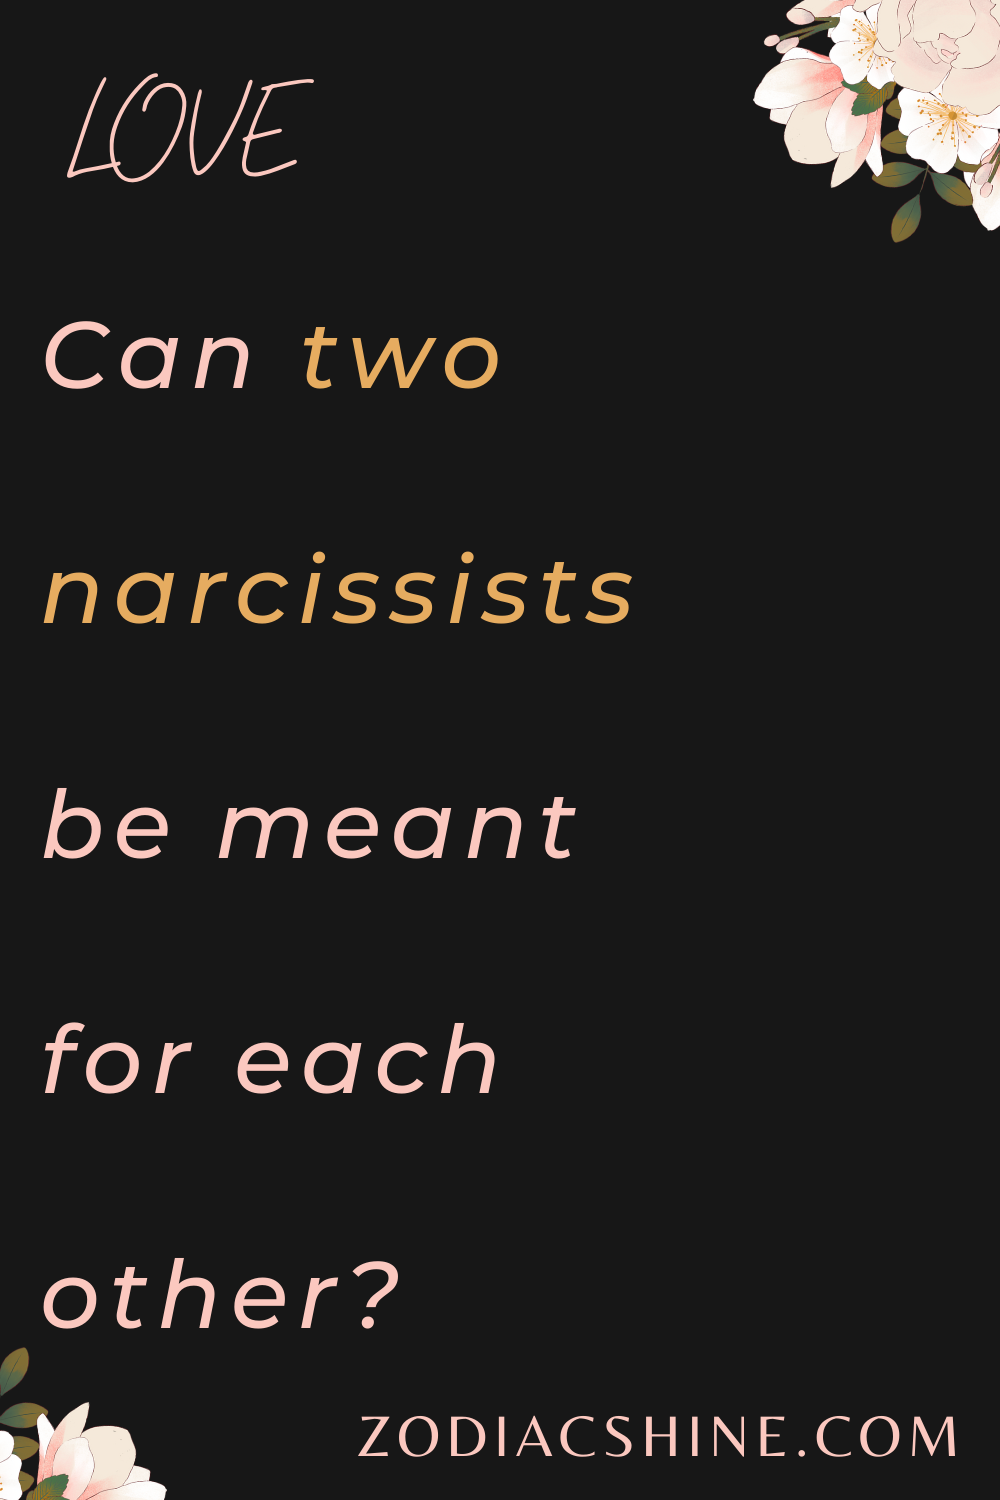 Can two narcissists be meant for each other?